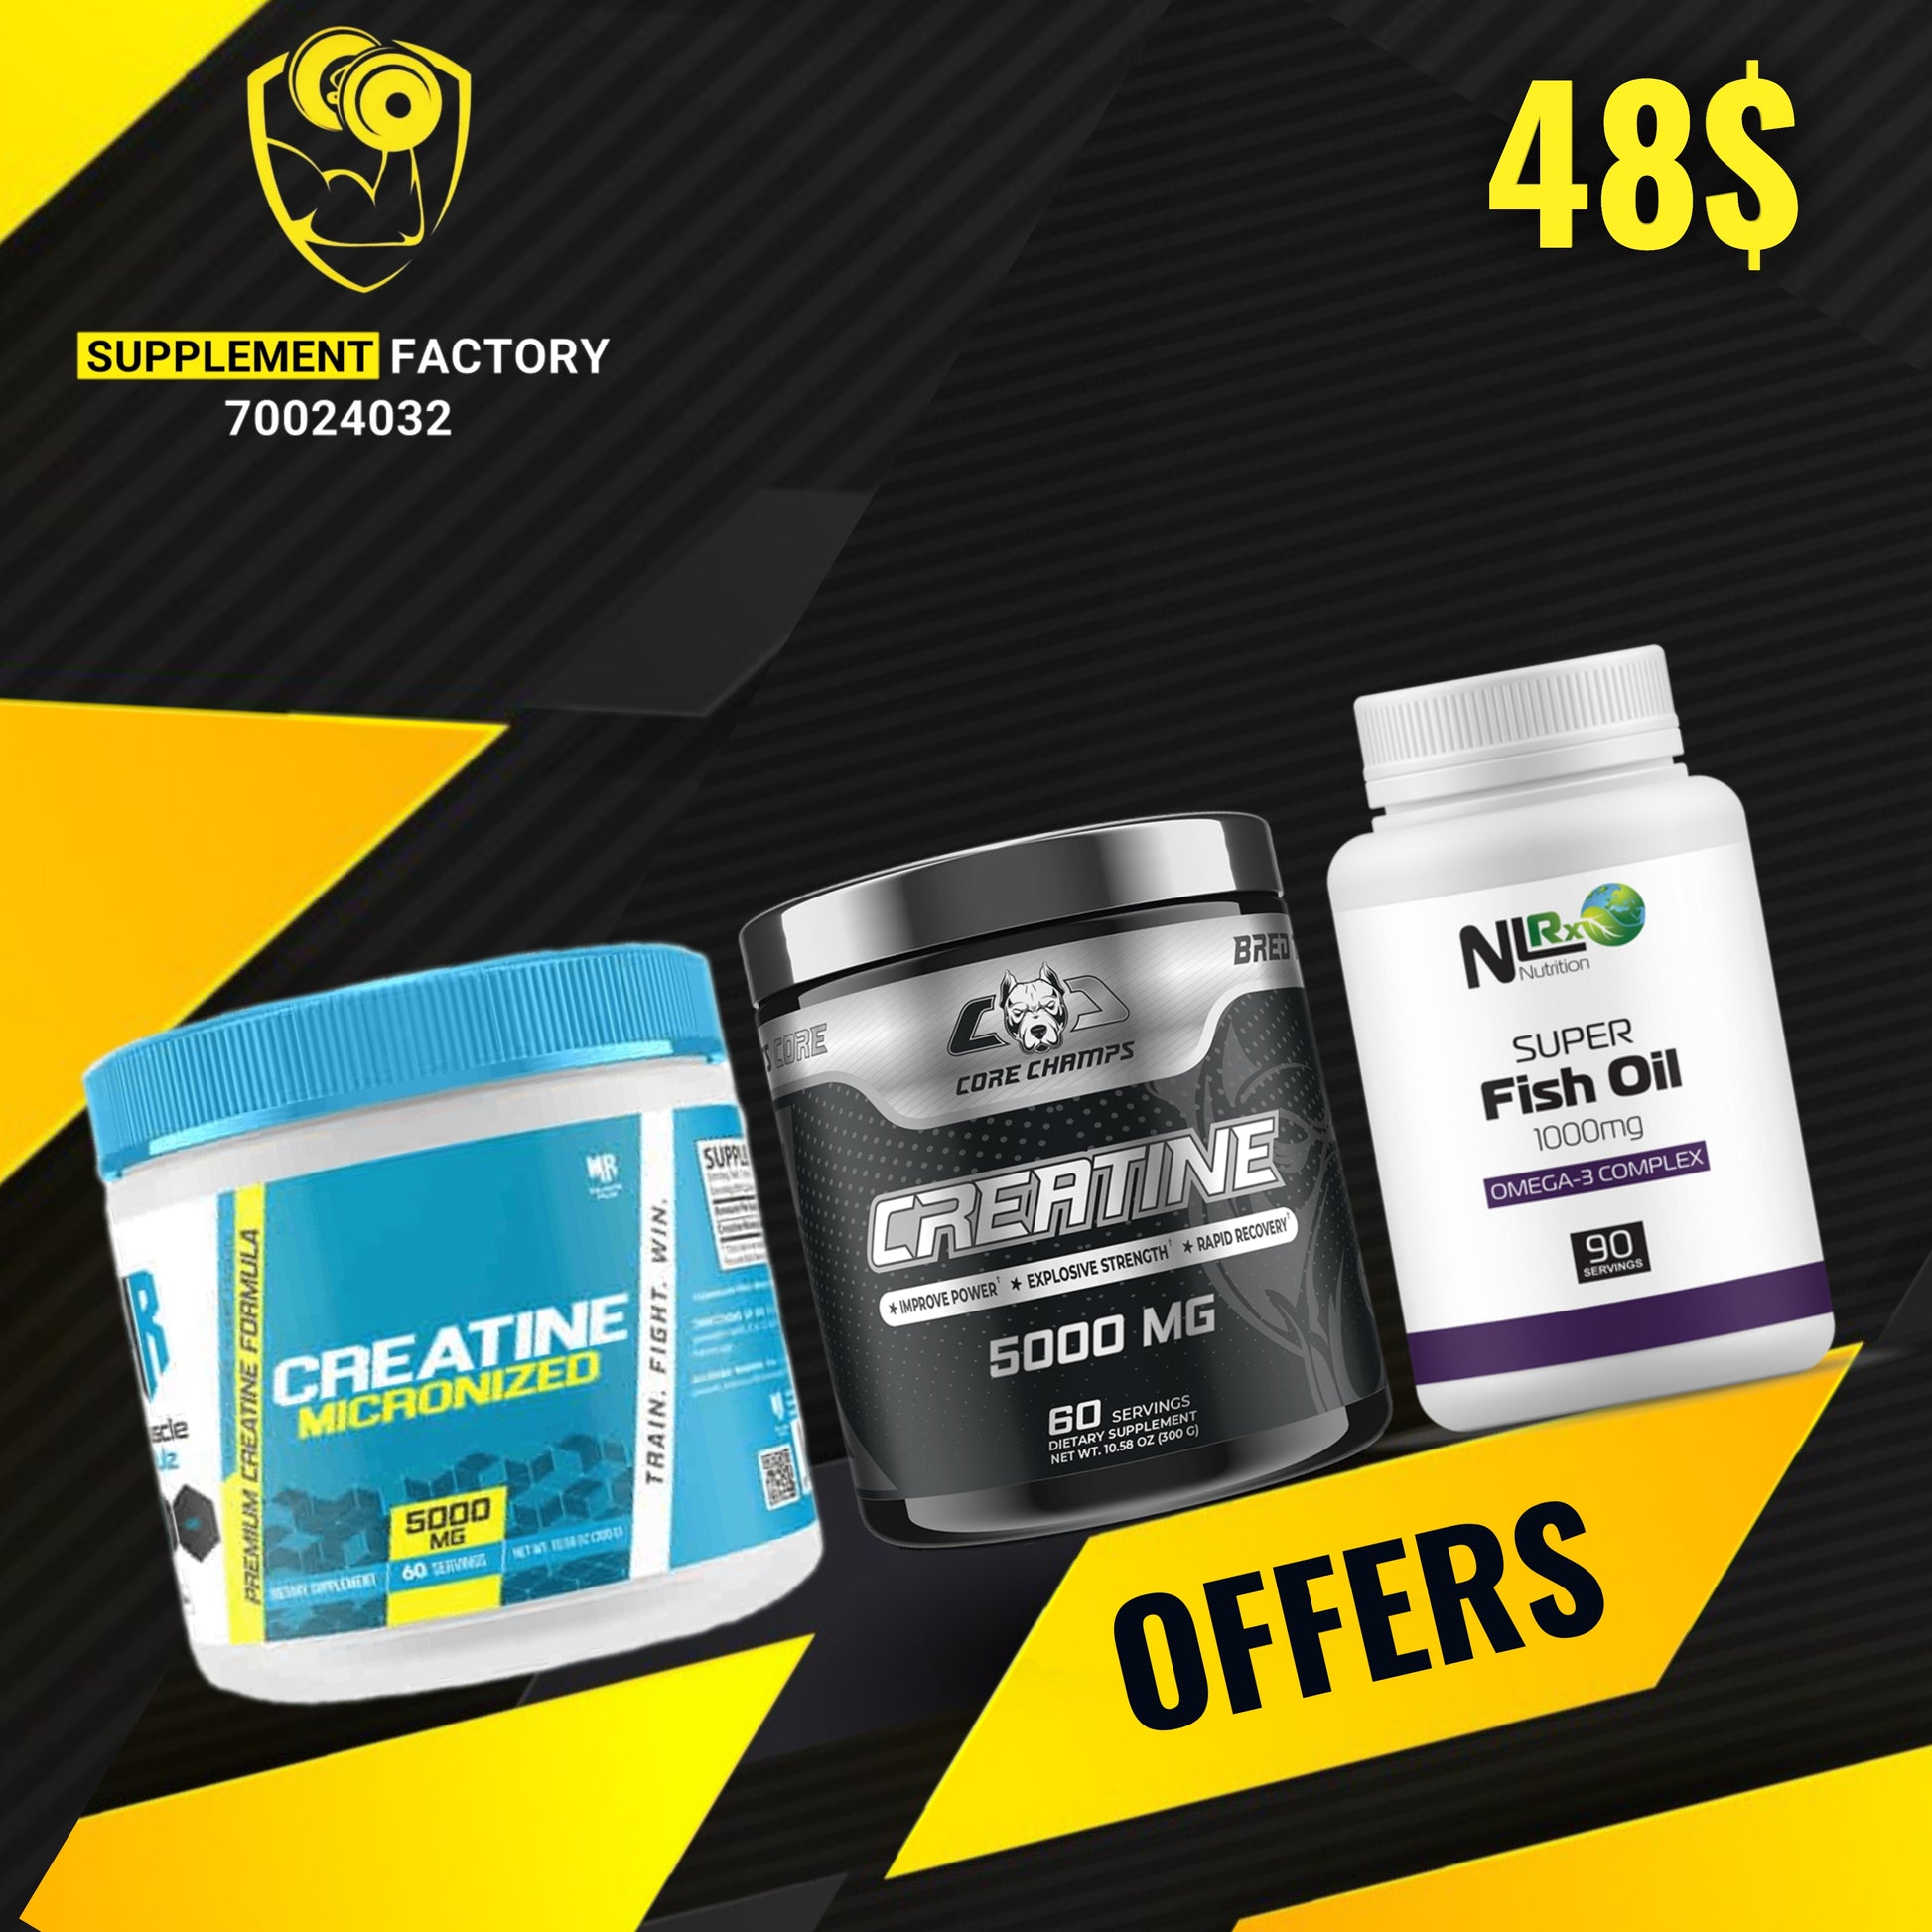 2 Creatine + Fishoil - The Supplements Factory